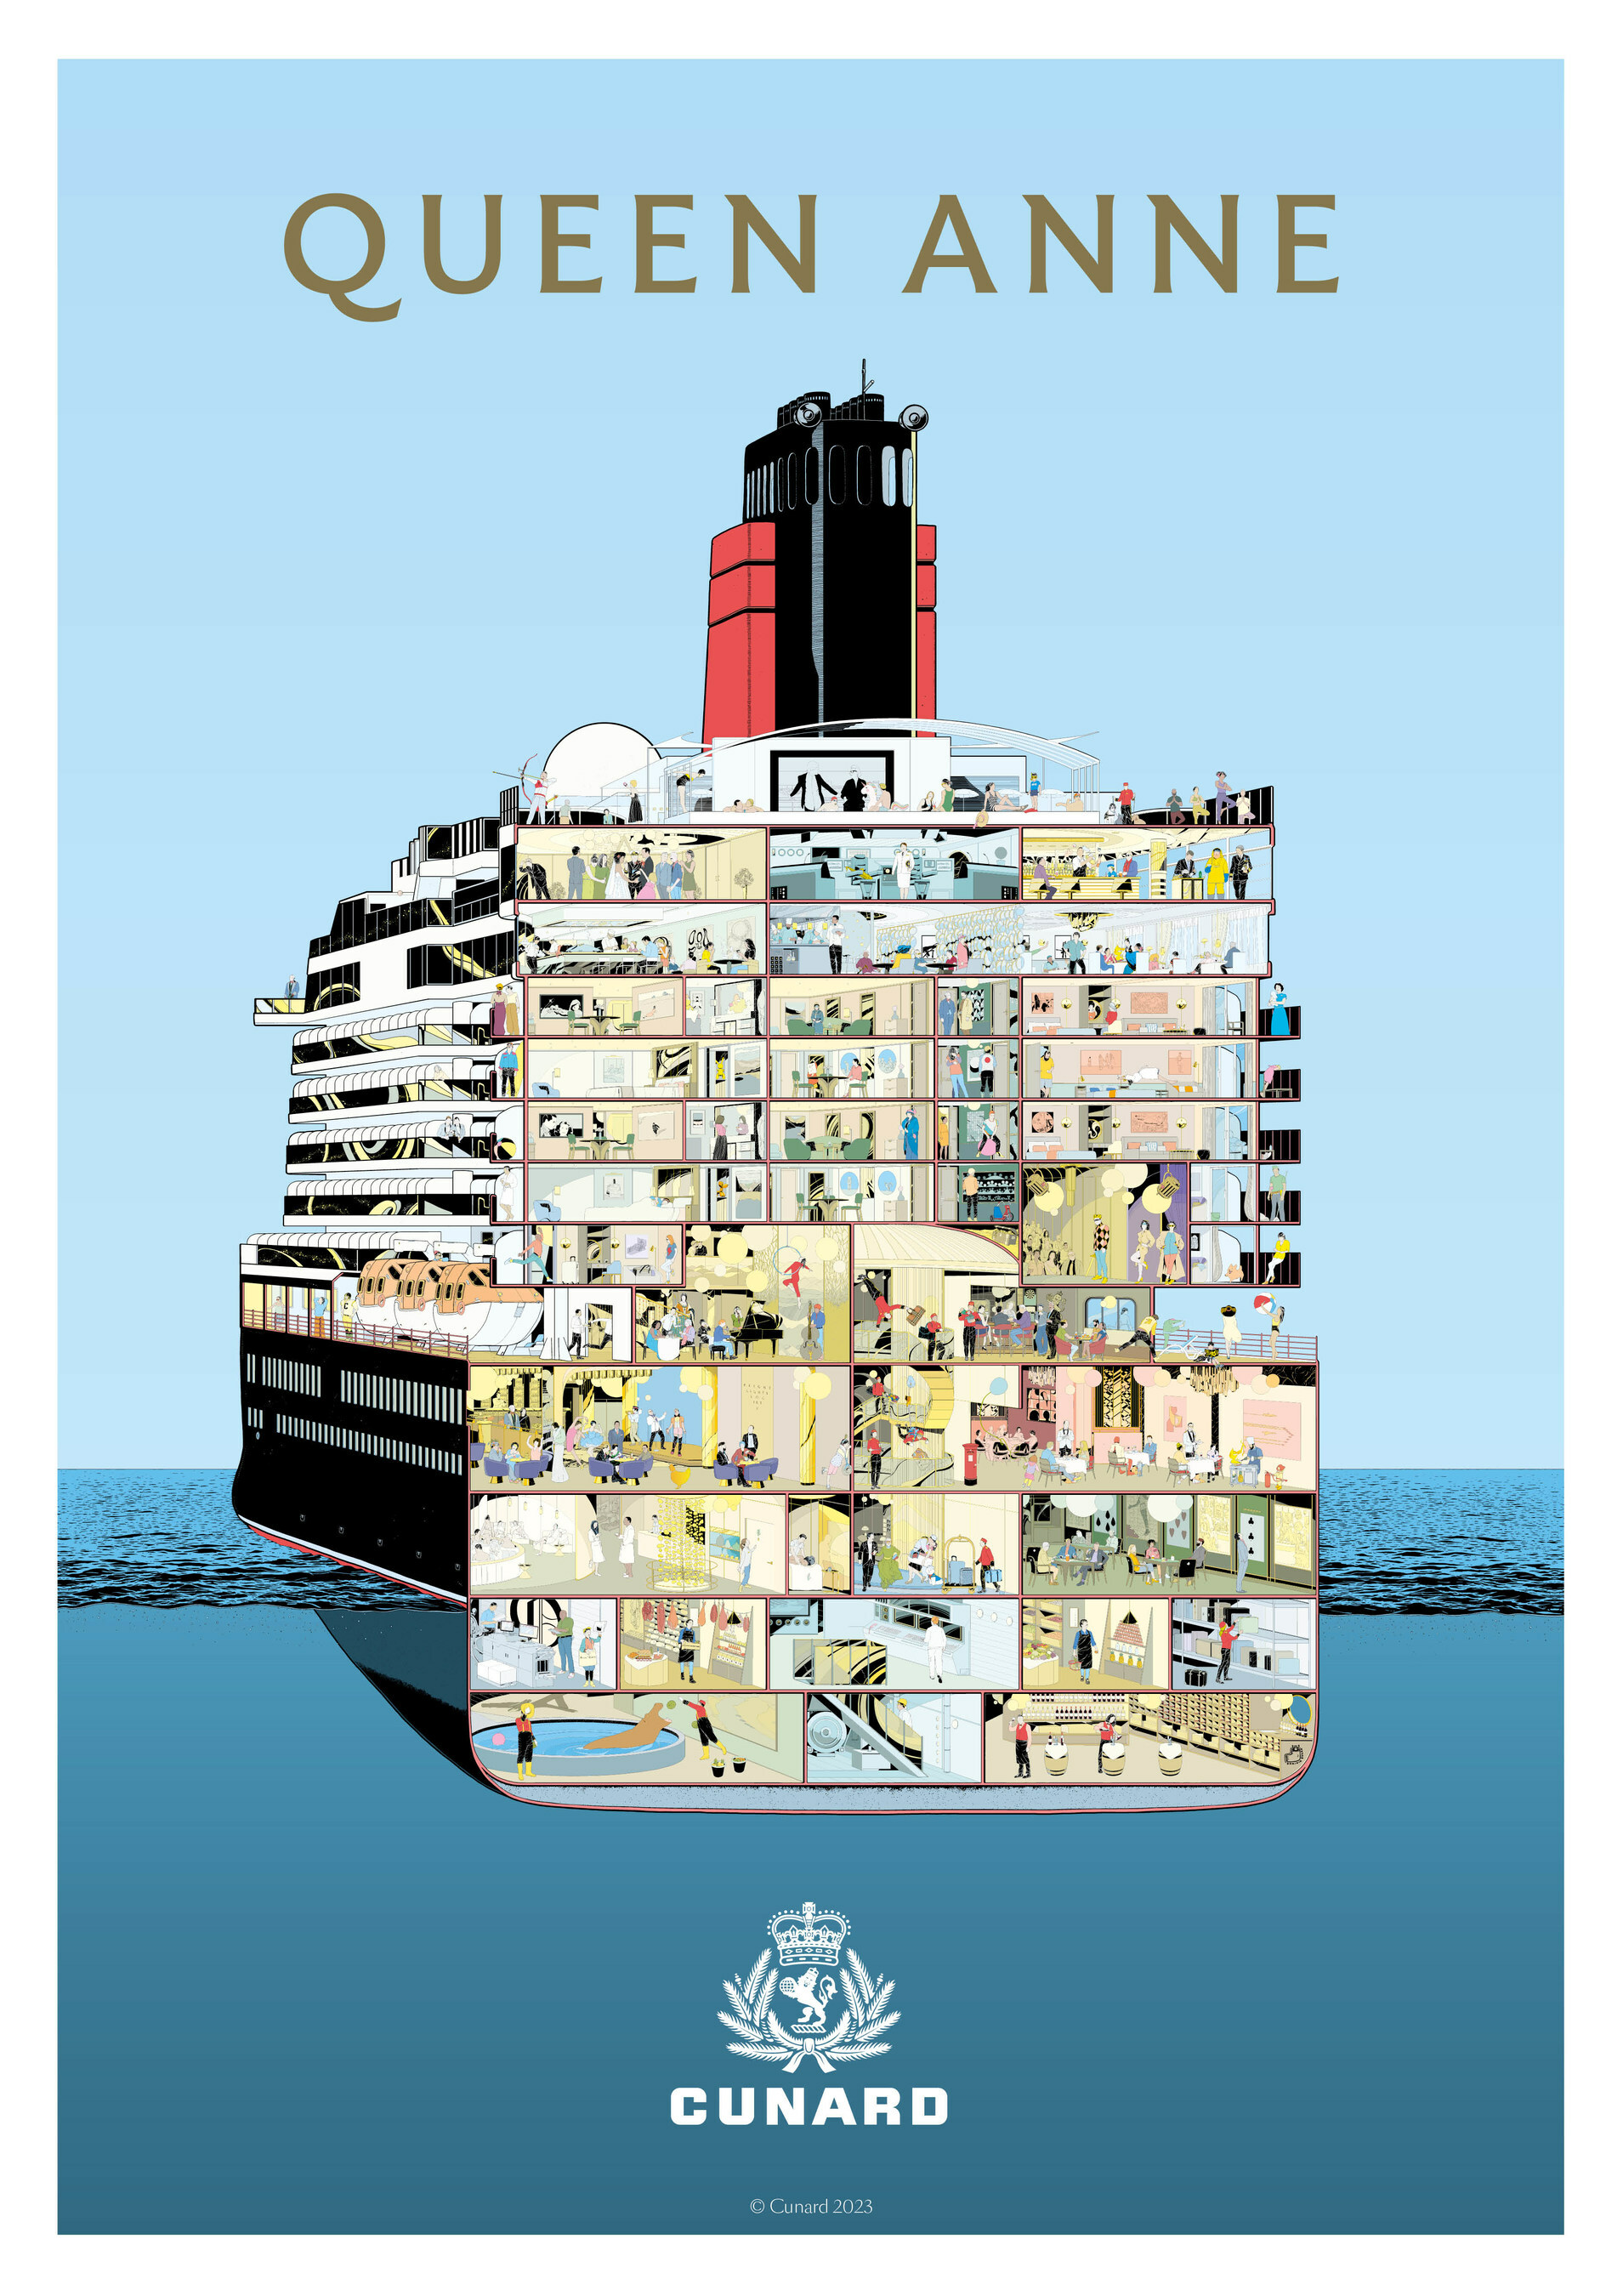 Cunard creates 1920's style Cutaway image to celebrate the company's 183rd Birthday, and the upcoming debut of its new ship, Queen Anne    (Image at LateCruiseNews.com - July 2023)